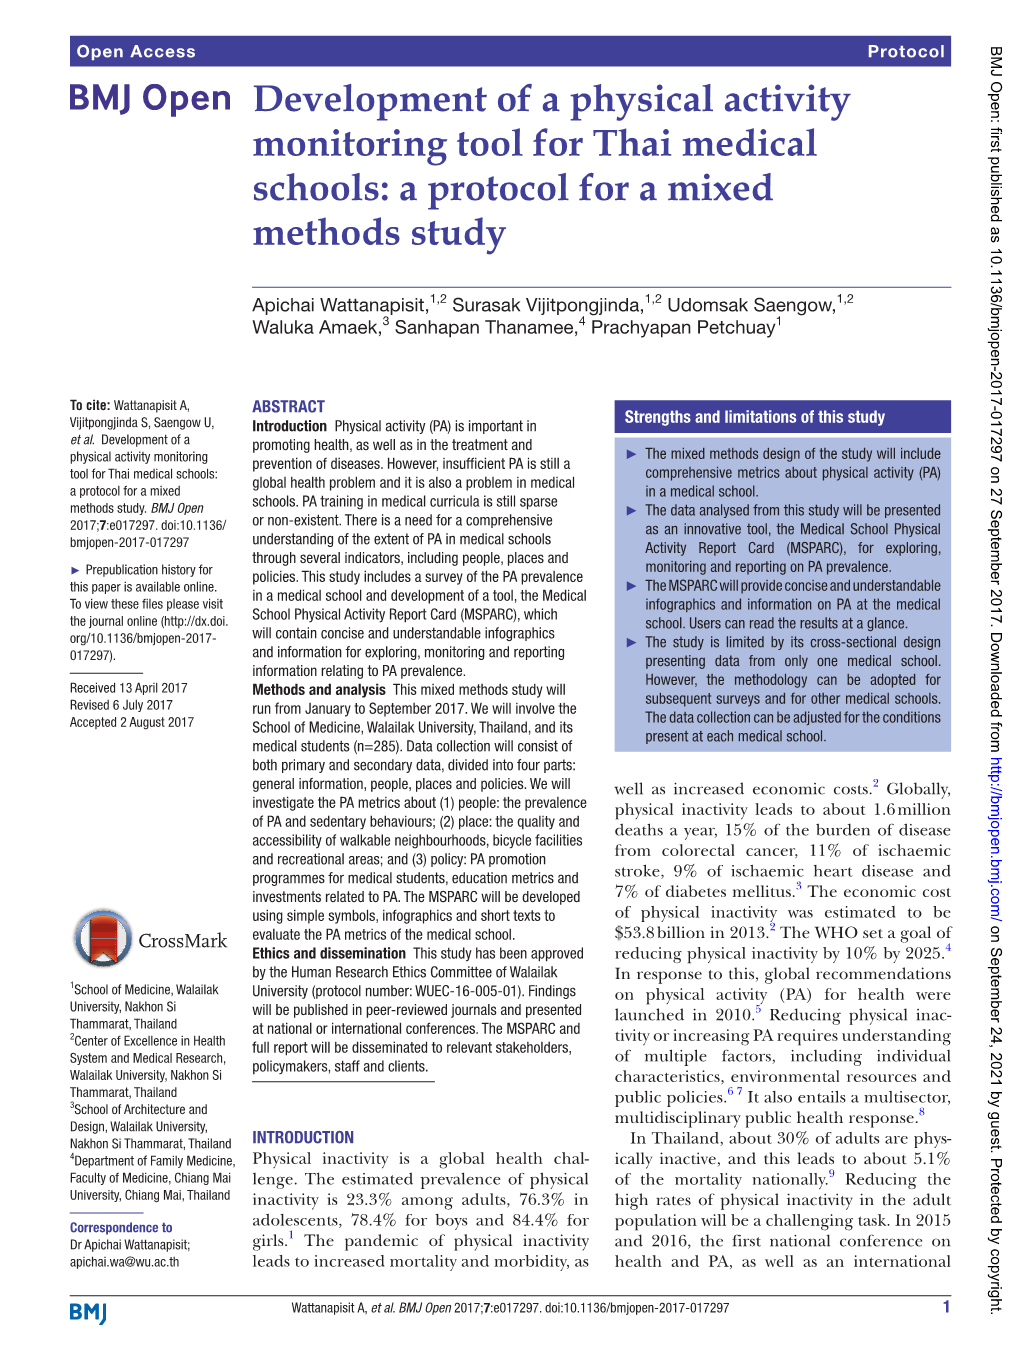 Development of a Physical Activity Monitoring Tool for Thai Medical Schools: a Protocol for a Mixed Methods Study